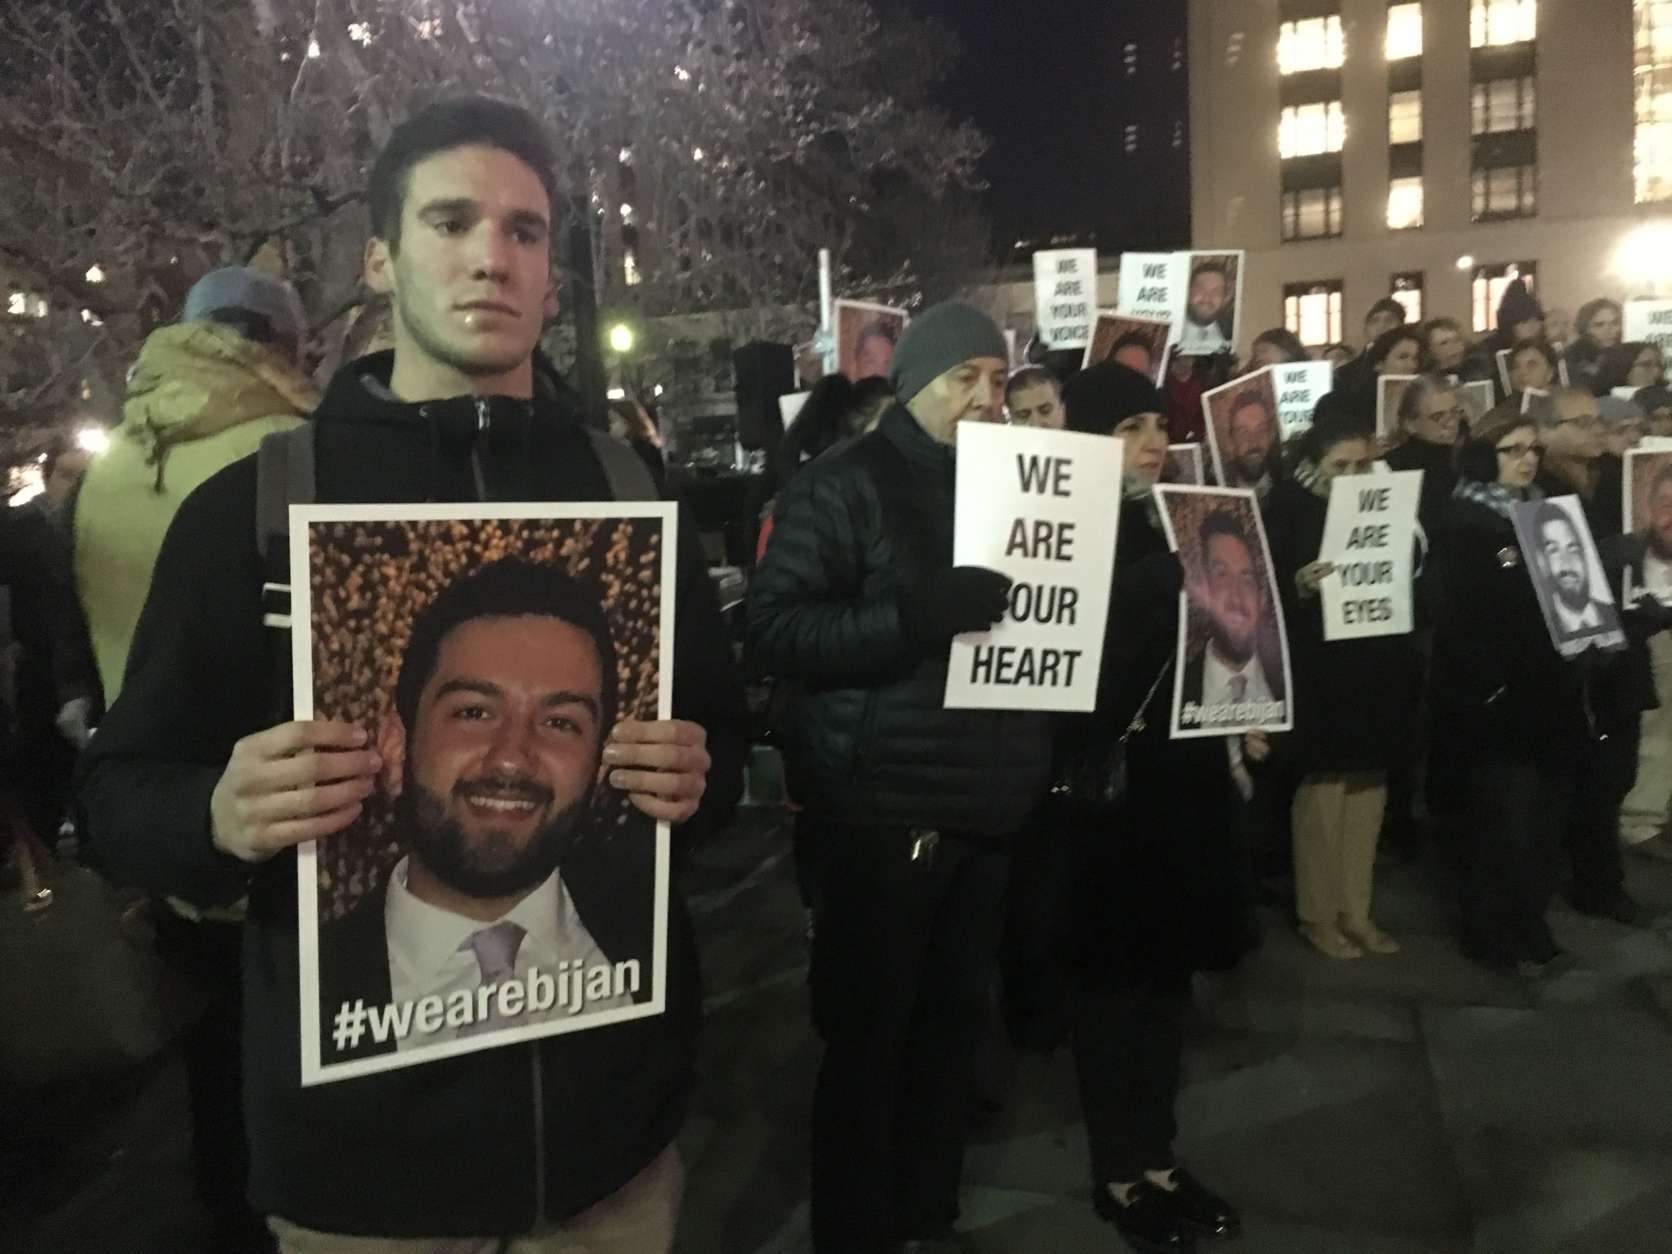 A large crowd gathered to demand answers in the death of 25-year-old Bijan Ghaisar, an accountant from McLean, Virginia. (WTOP/Mike Murillo)